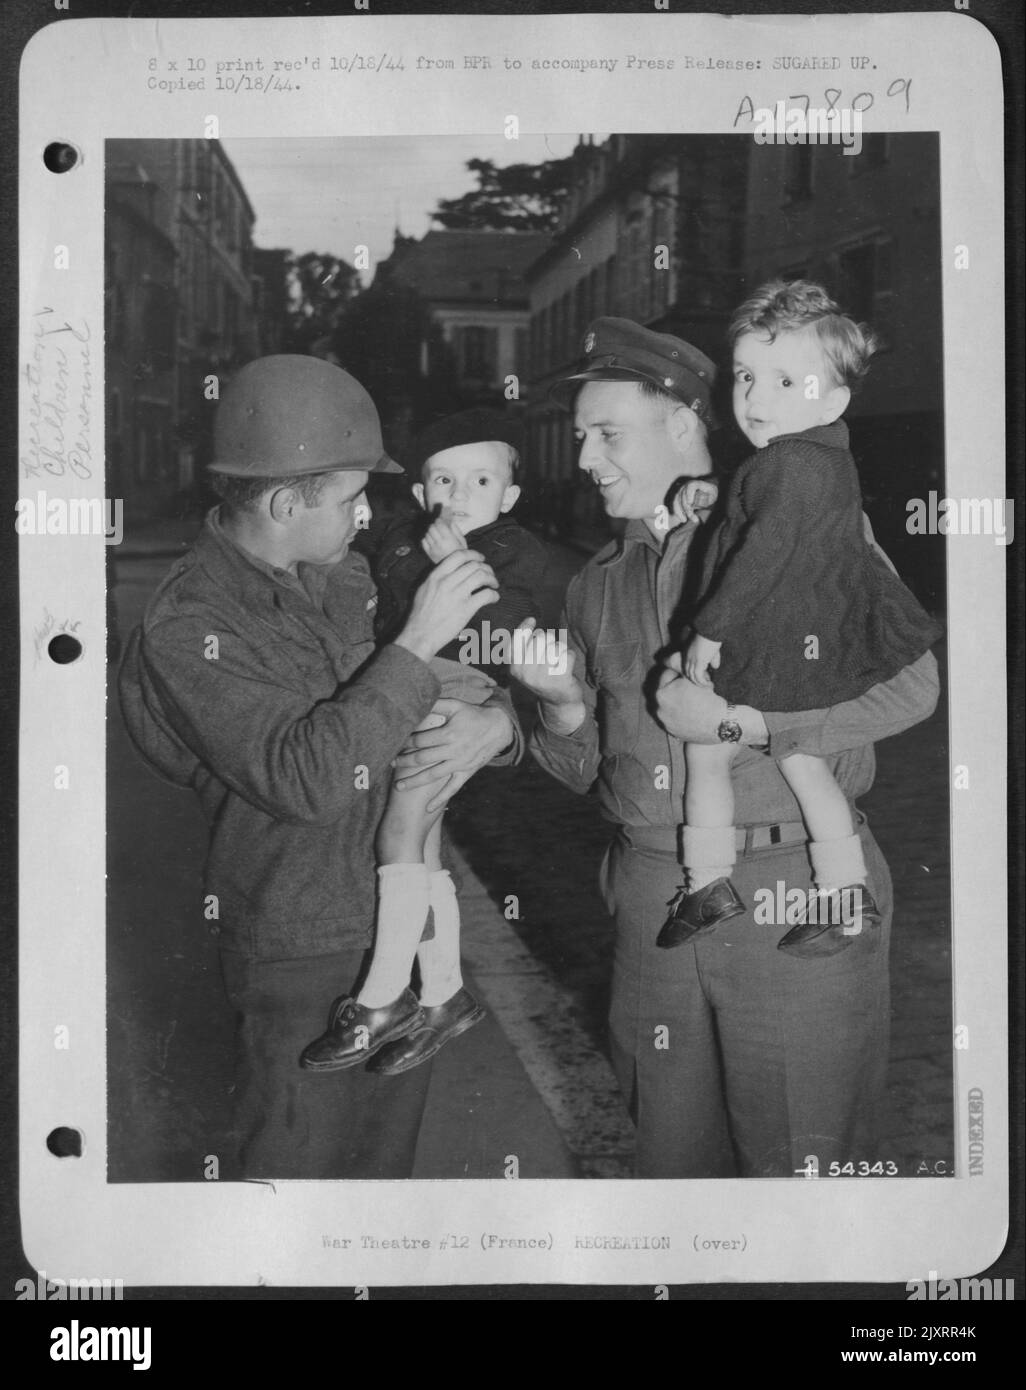 FRANCE-Sgts Jim Swarts, Jr., (left), Kansas City, Mo., and James Beggs, Clarksville, Tex., of a U.S. Army 9th Air Force Martin B-26 Marauder group can't talk French so substituted candy for conversation. These friendly expressions resulted. Stock Photo